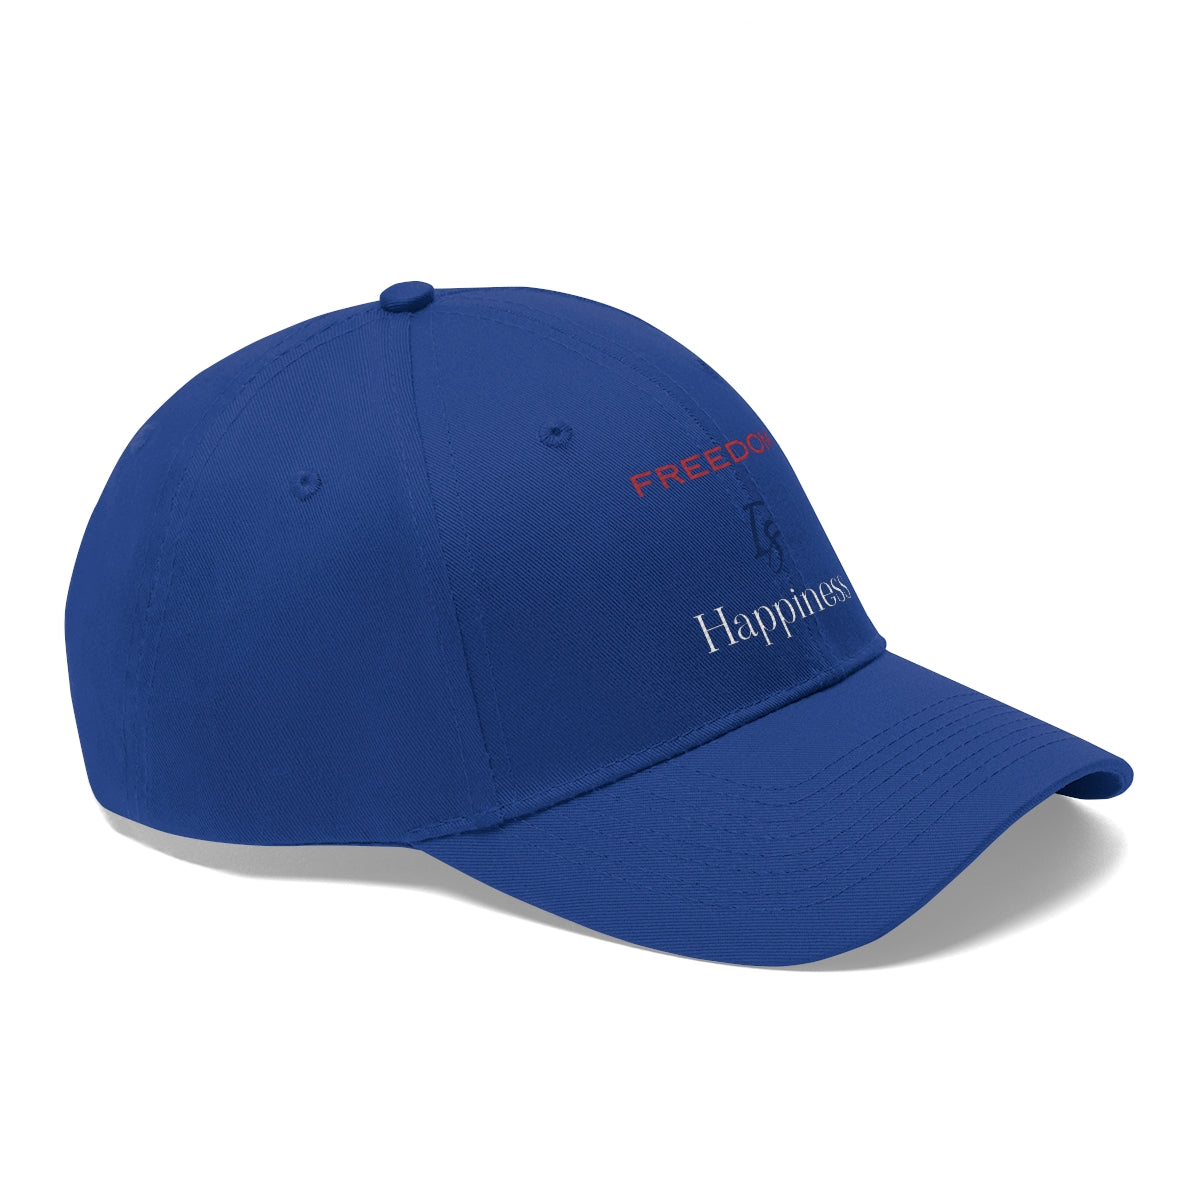 Freedom is happiness hat